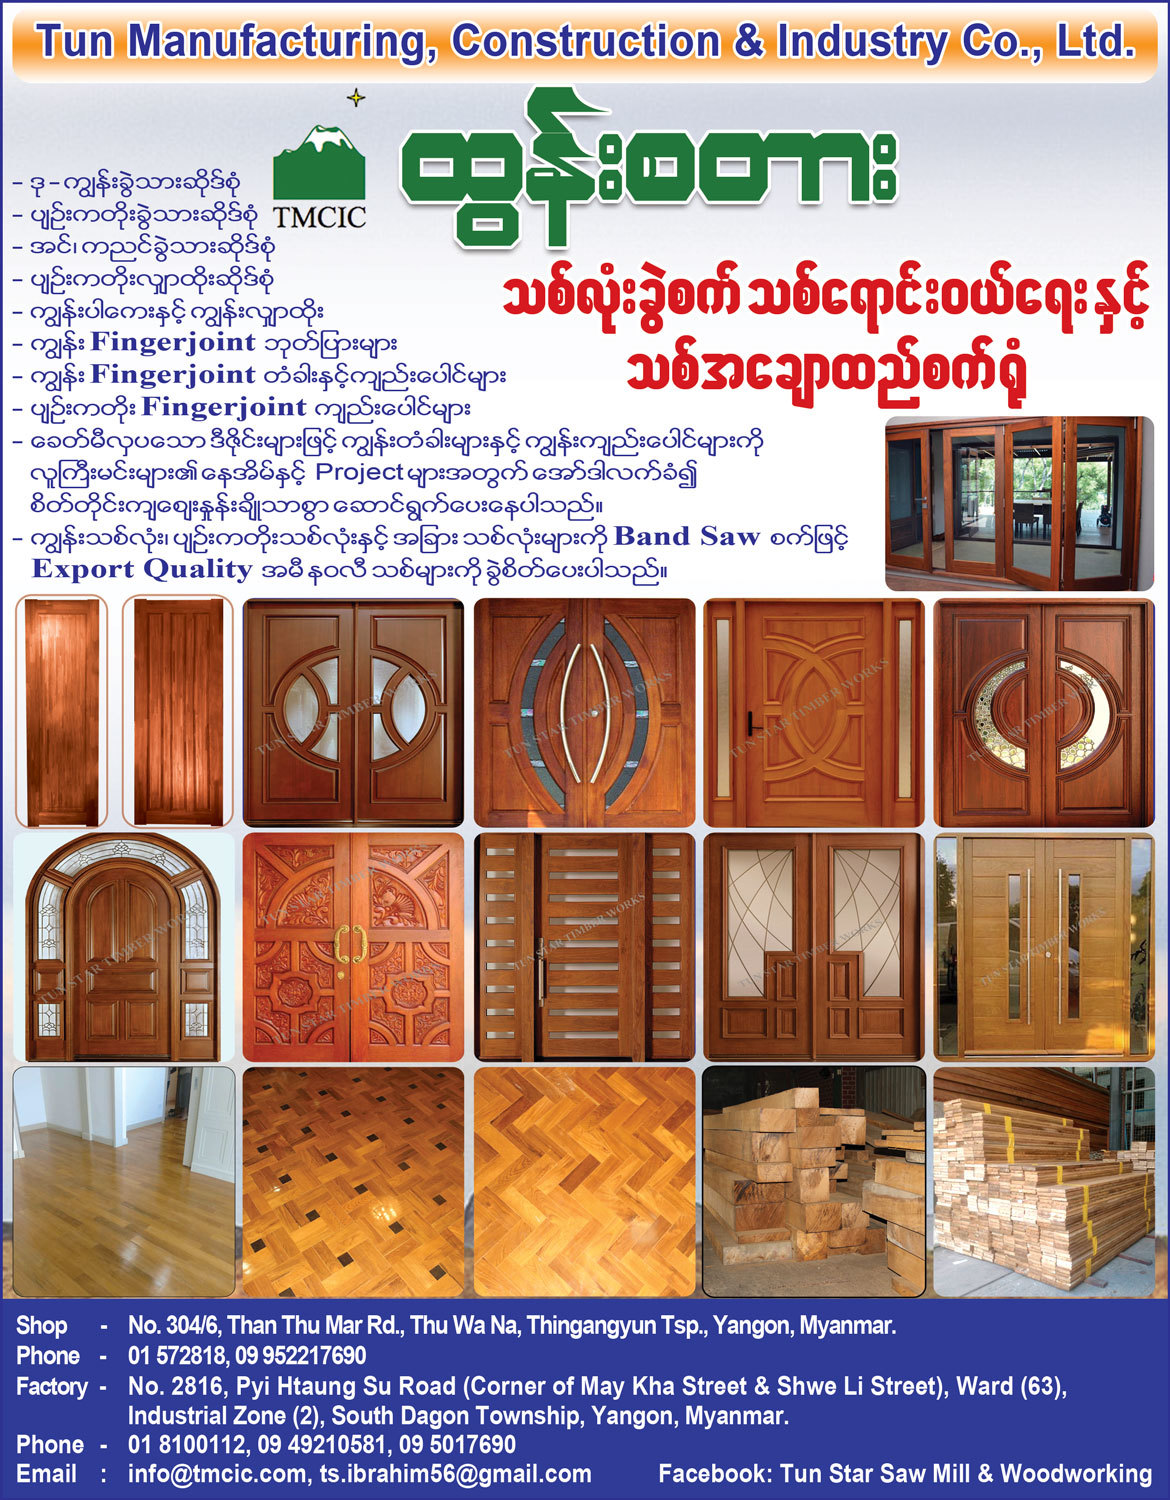 Tun-Manufacturing-Construction-&-Industry-Co-Ltd_Wooden-Product_(A)_6.jpg